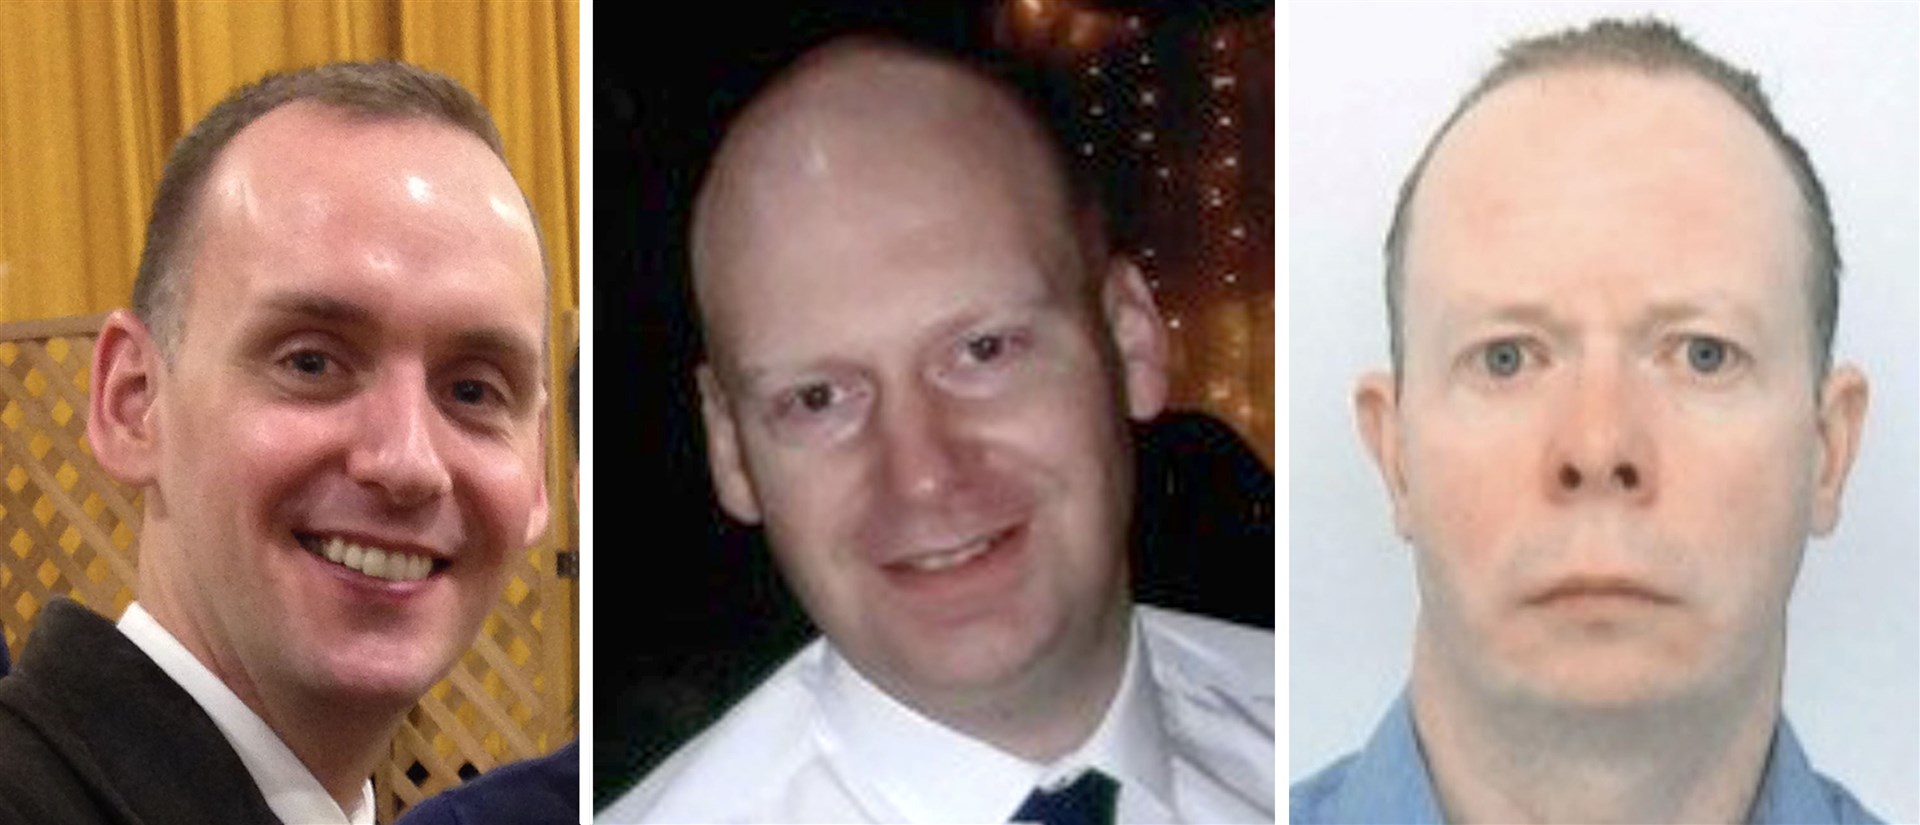 Joe Ritchie-Bennett, James Furlong and David Wails, the three victims of the Reading terror attack (Family Handout/PA)